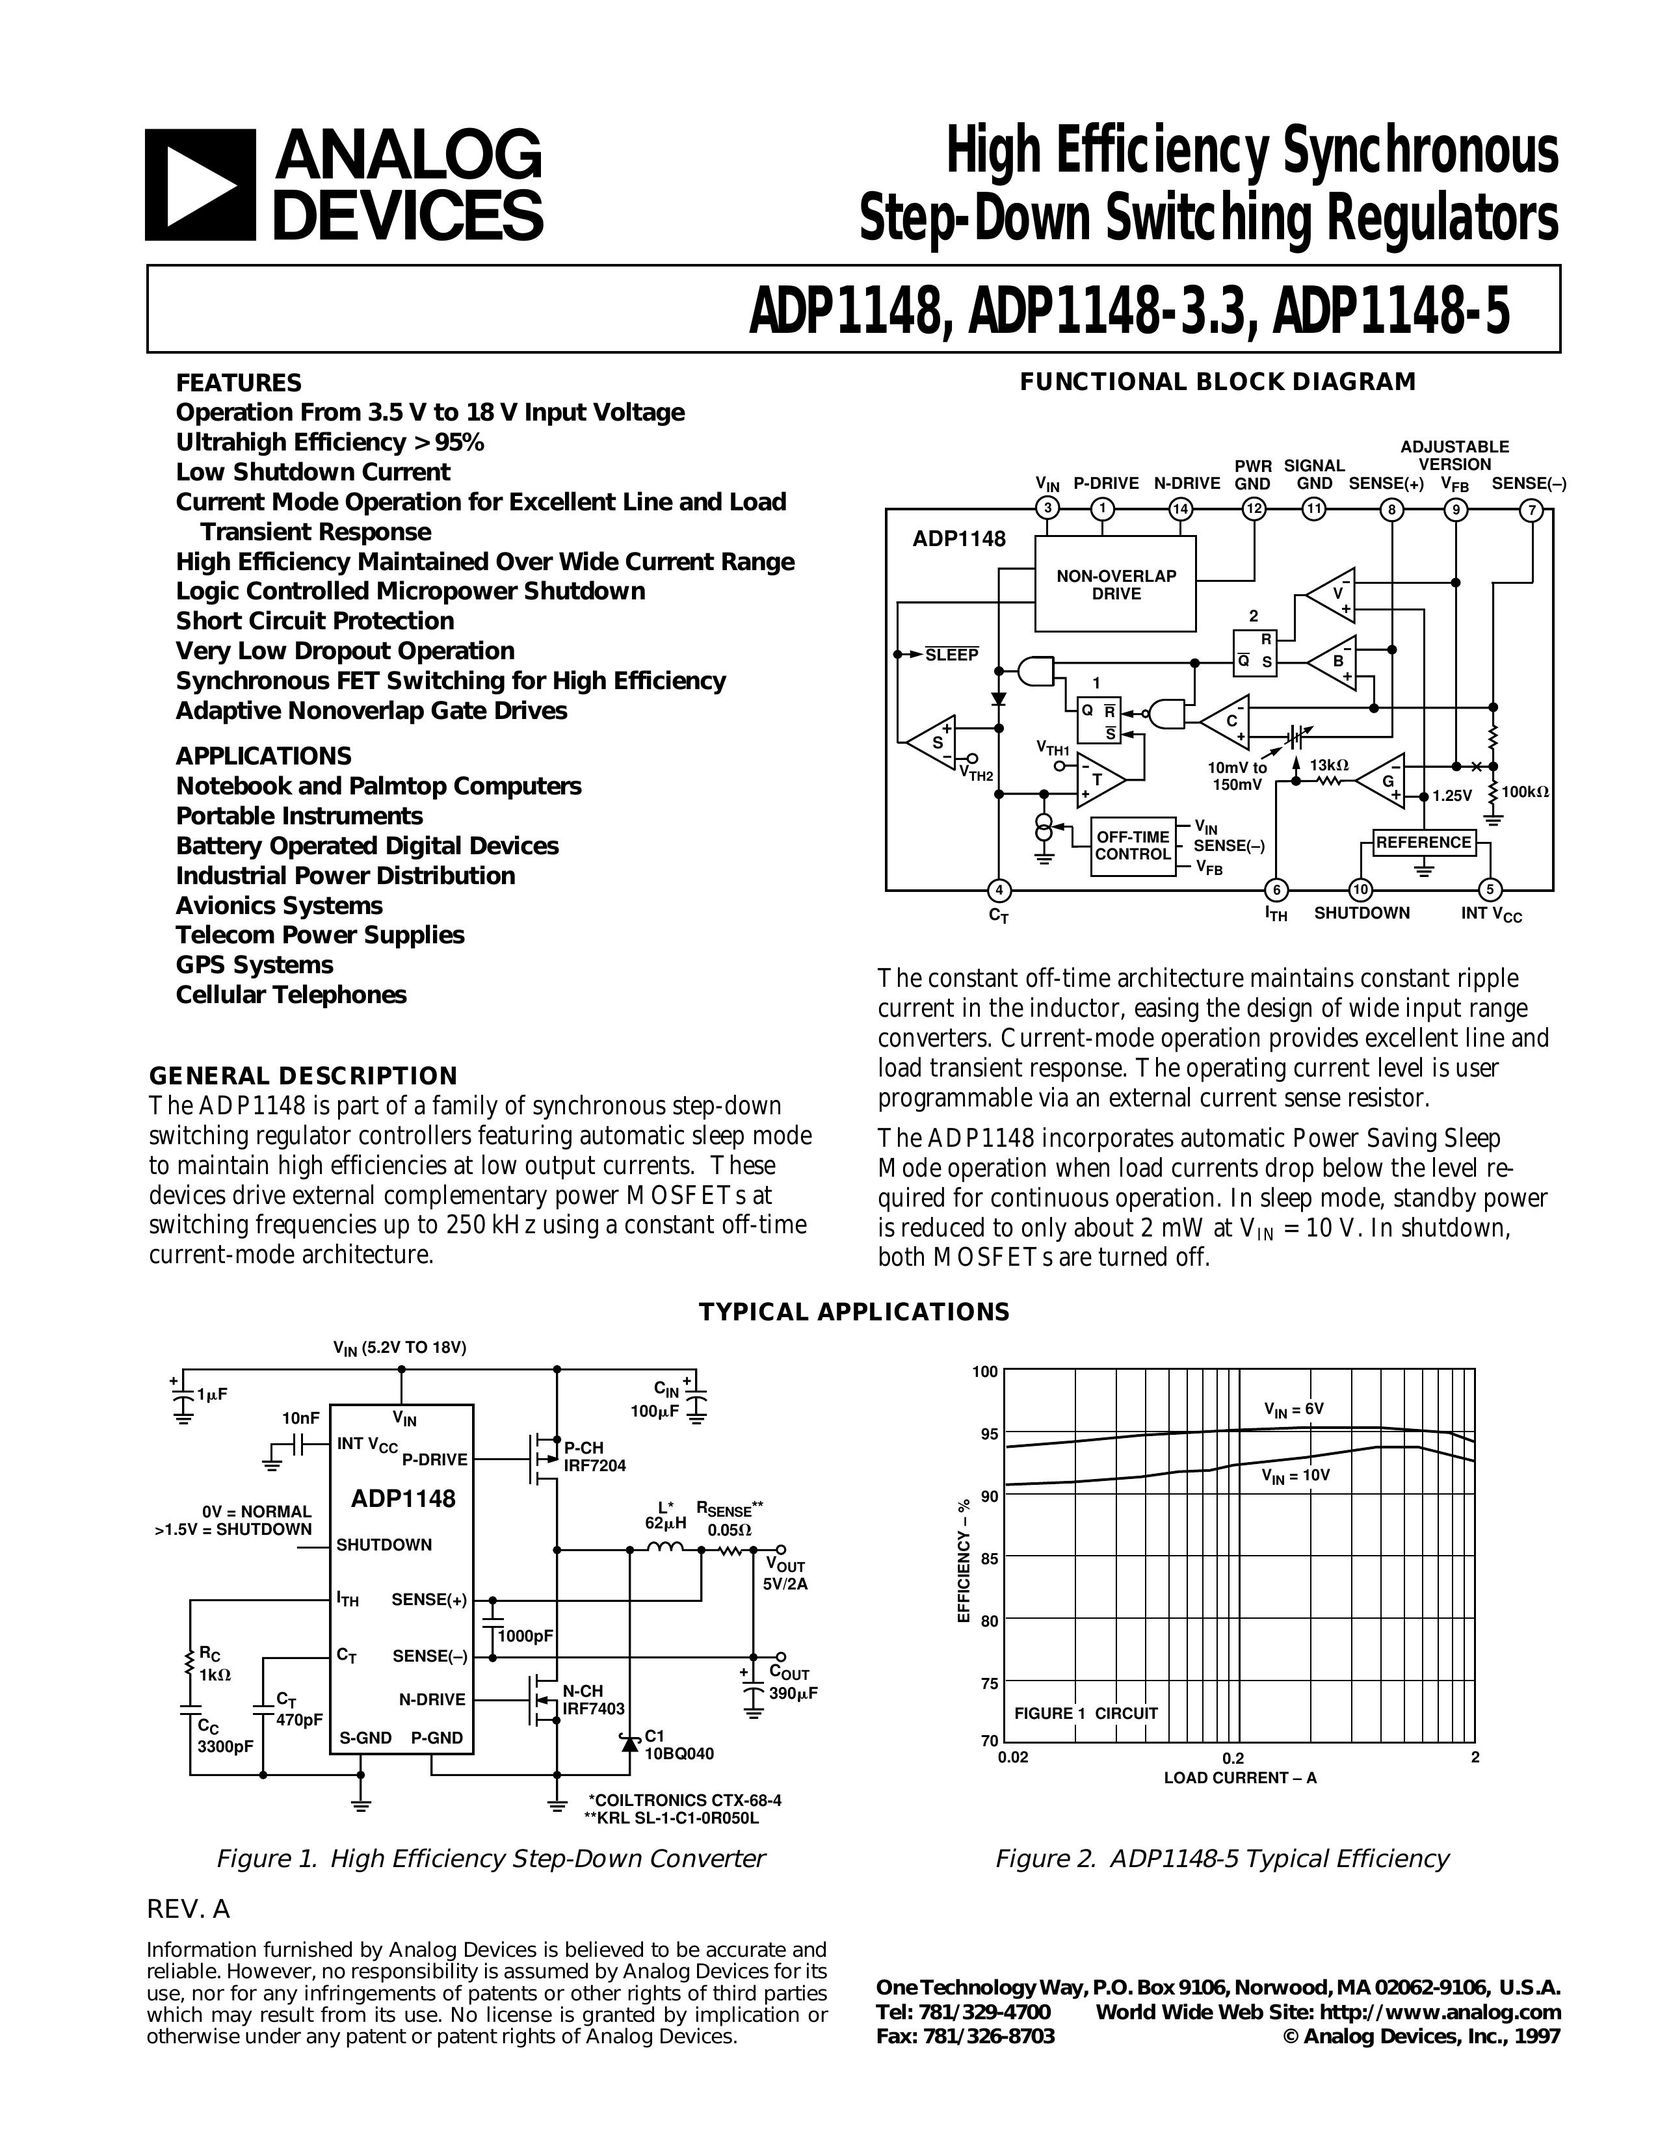 Analog Devices ADP1148 Clock User Manual